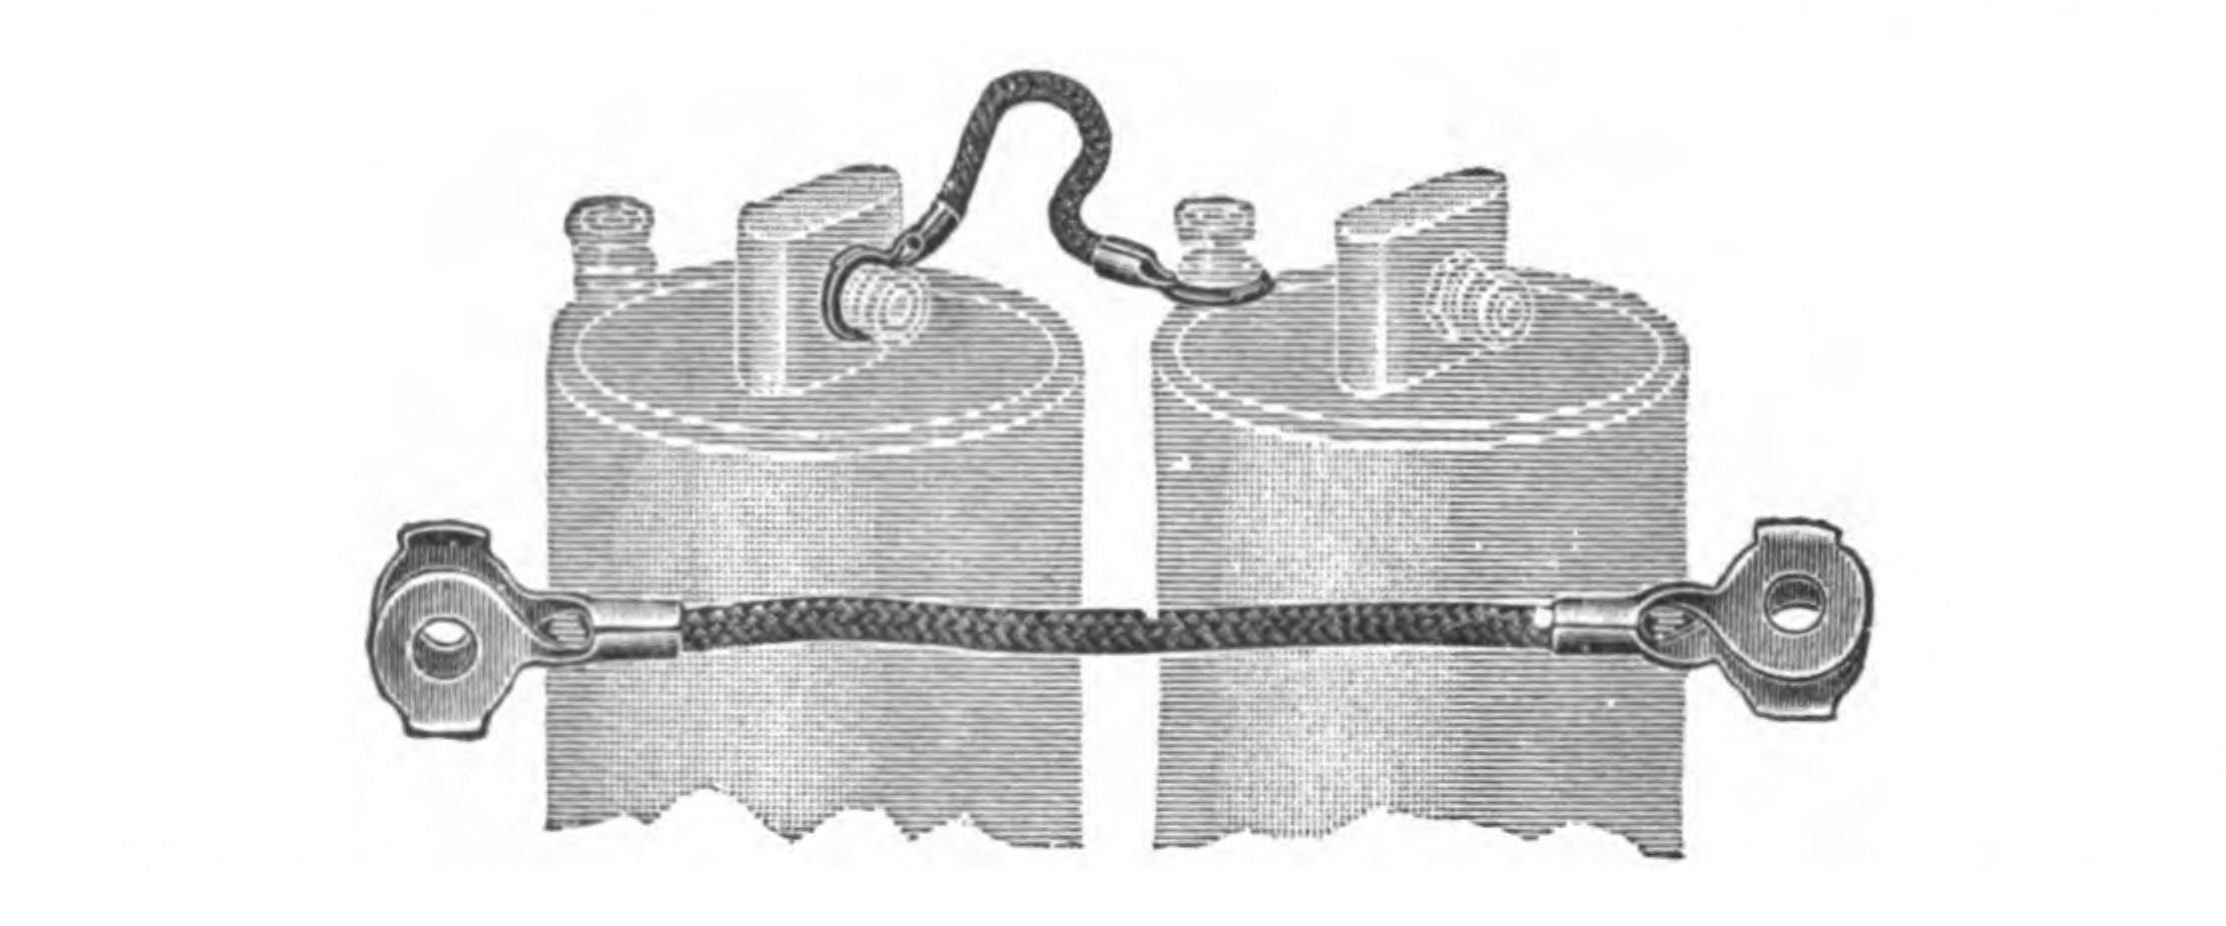 FIG. 36.—Battery Connectors like that shown above can be obtained for 1 1/2 cents each and will be found to be very handy.